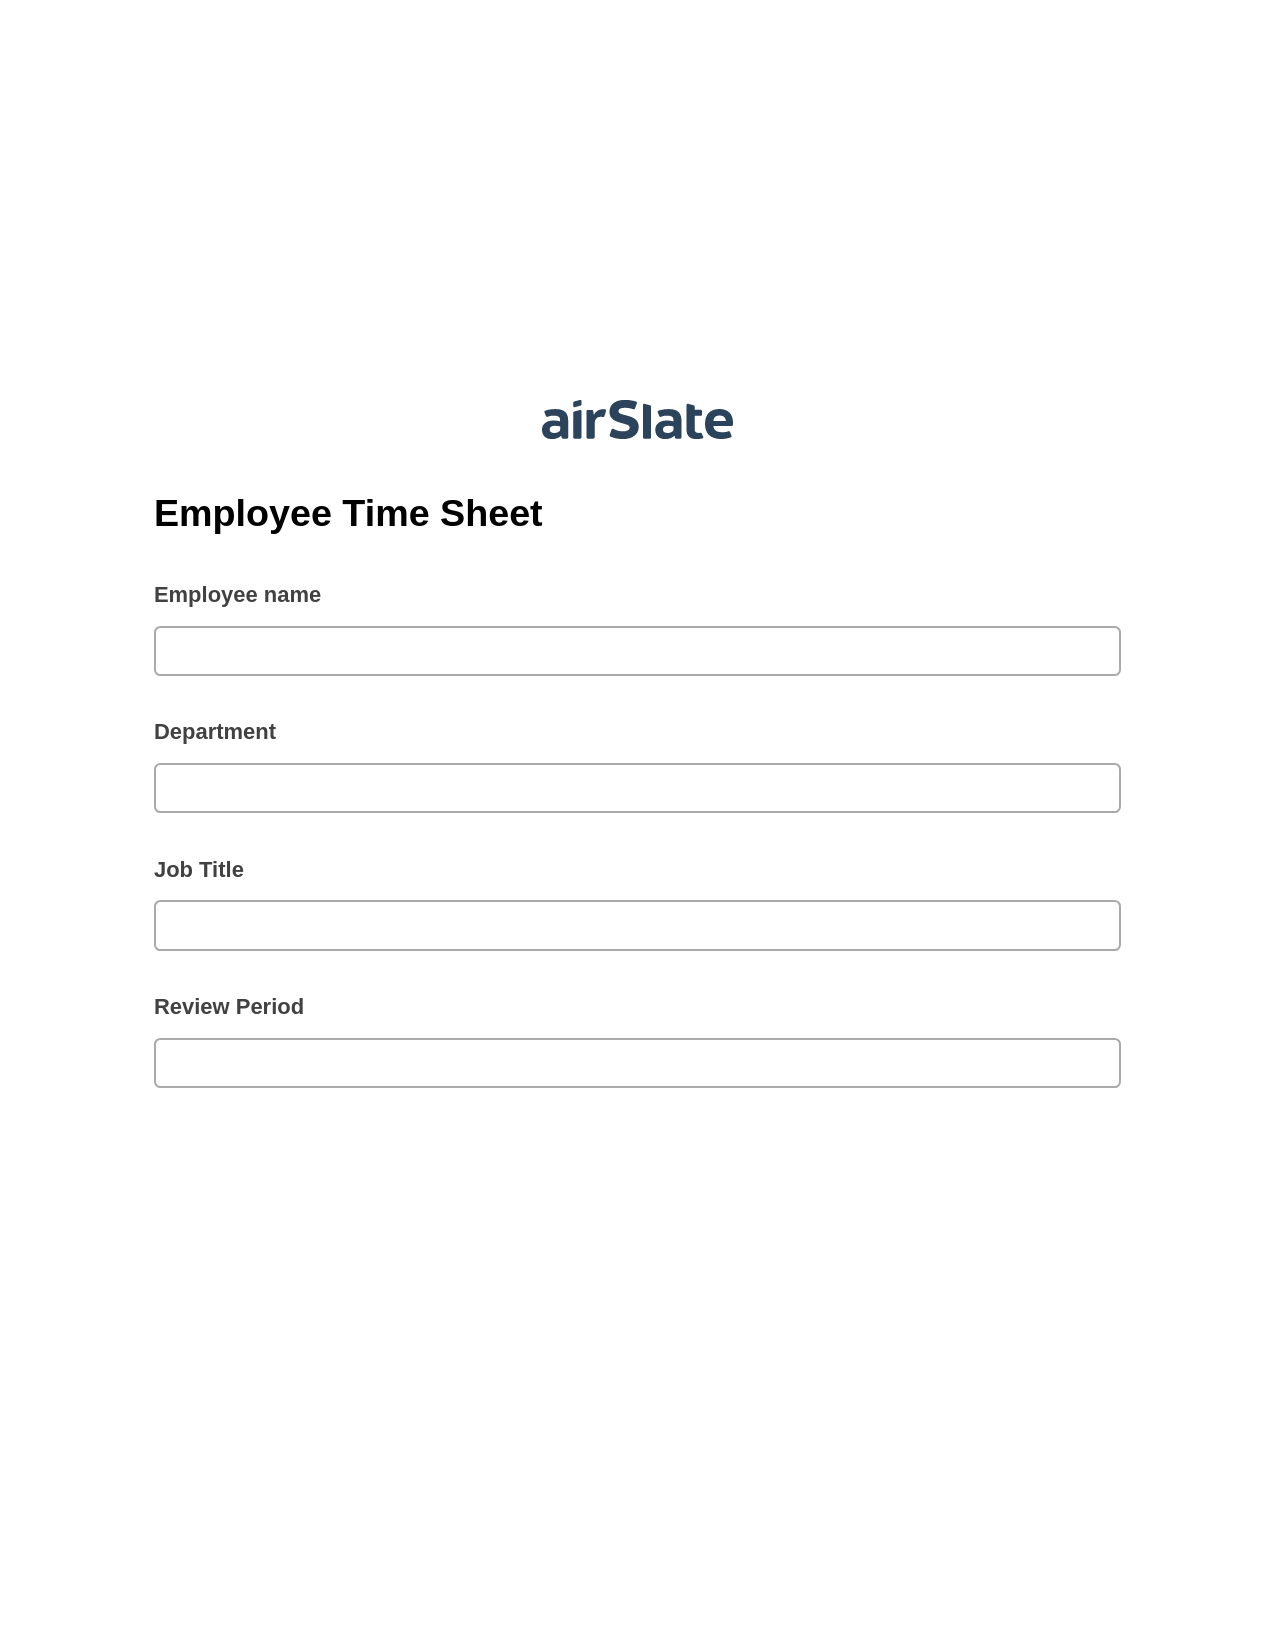 Employee Time Sheet Pre-fill Dropdowns from Google Sheet Bot, Create slate addon, Export to Excel 365 Bot